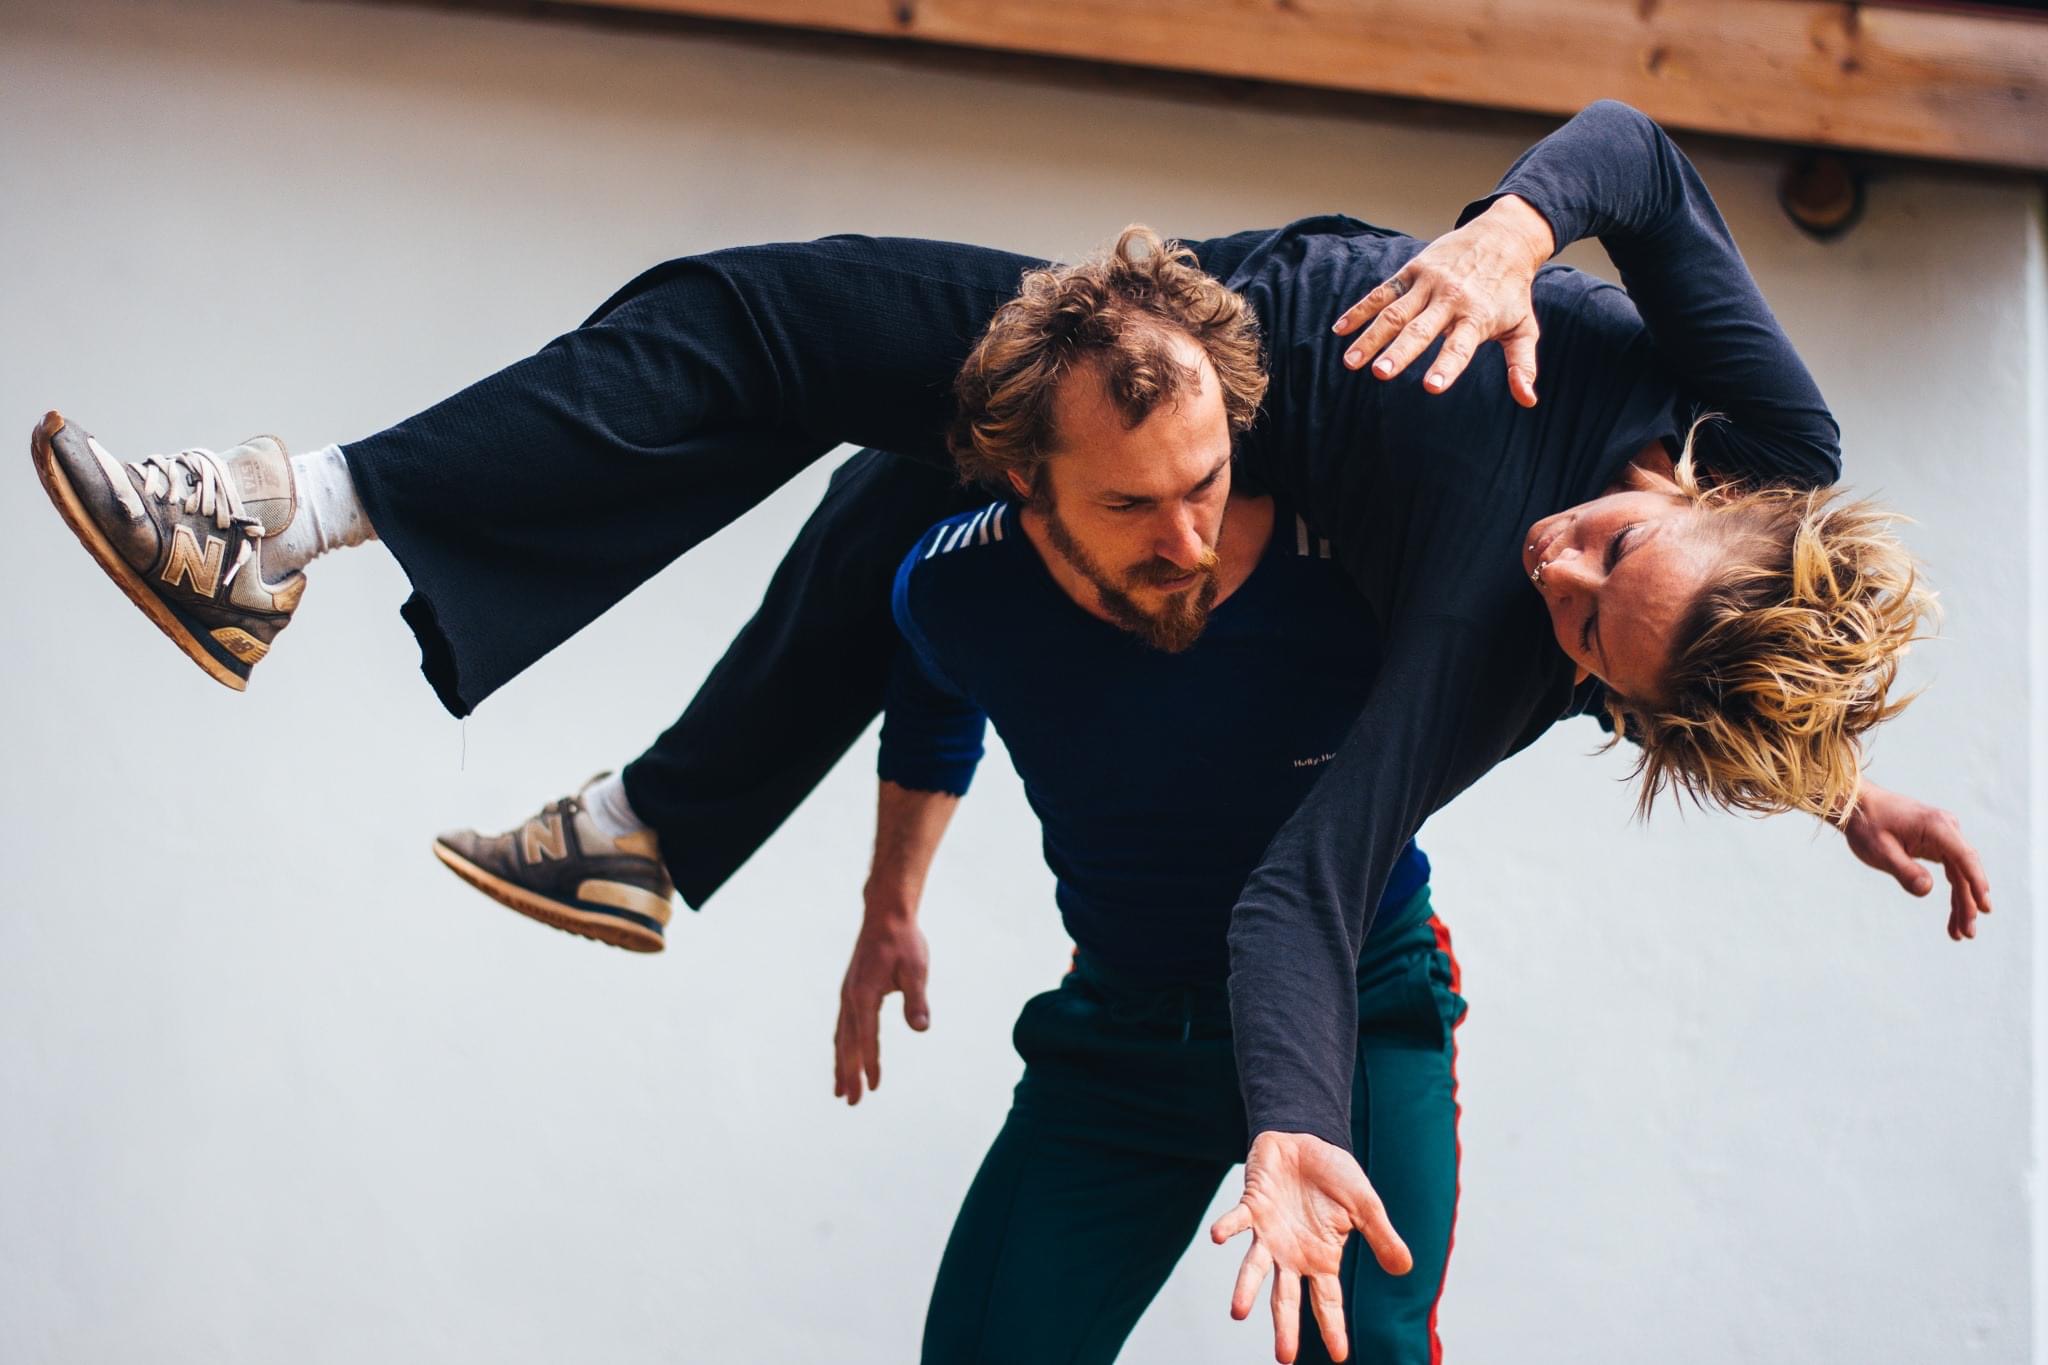 Falling & Flying-Contact Improvisation workshop with Hugh Stanier